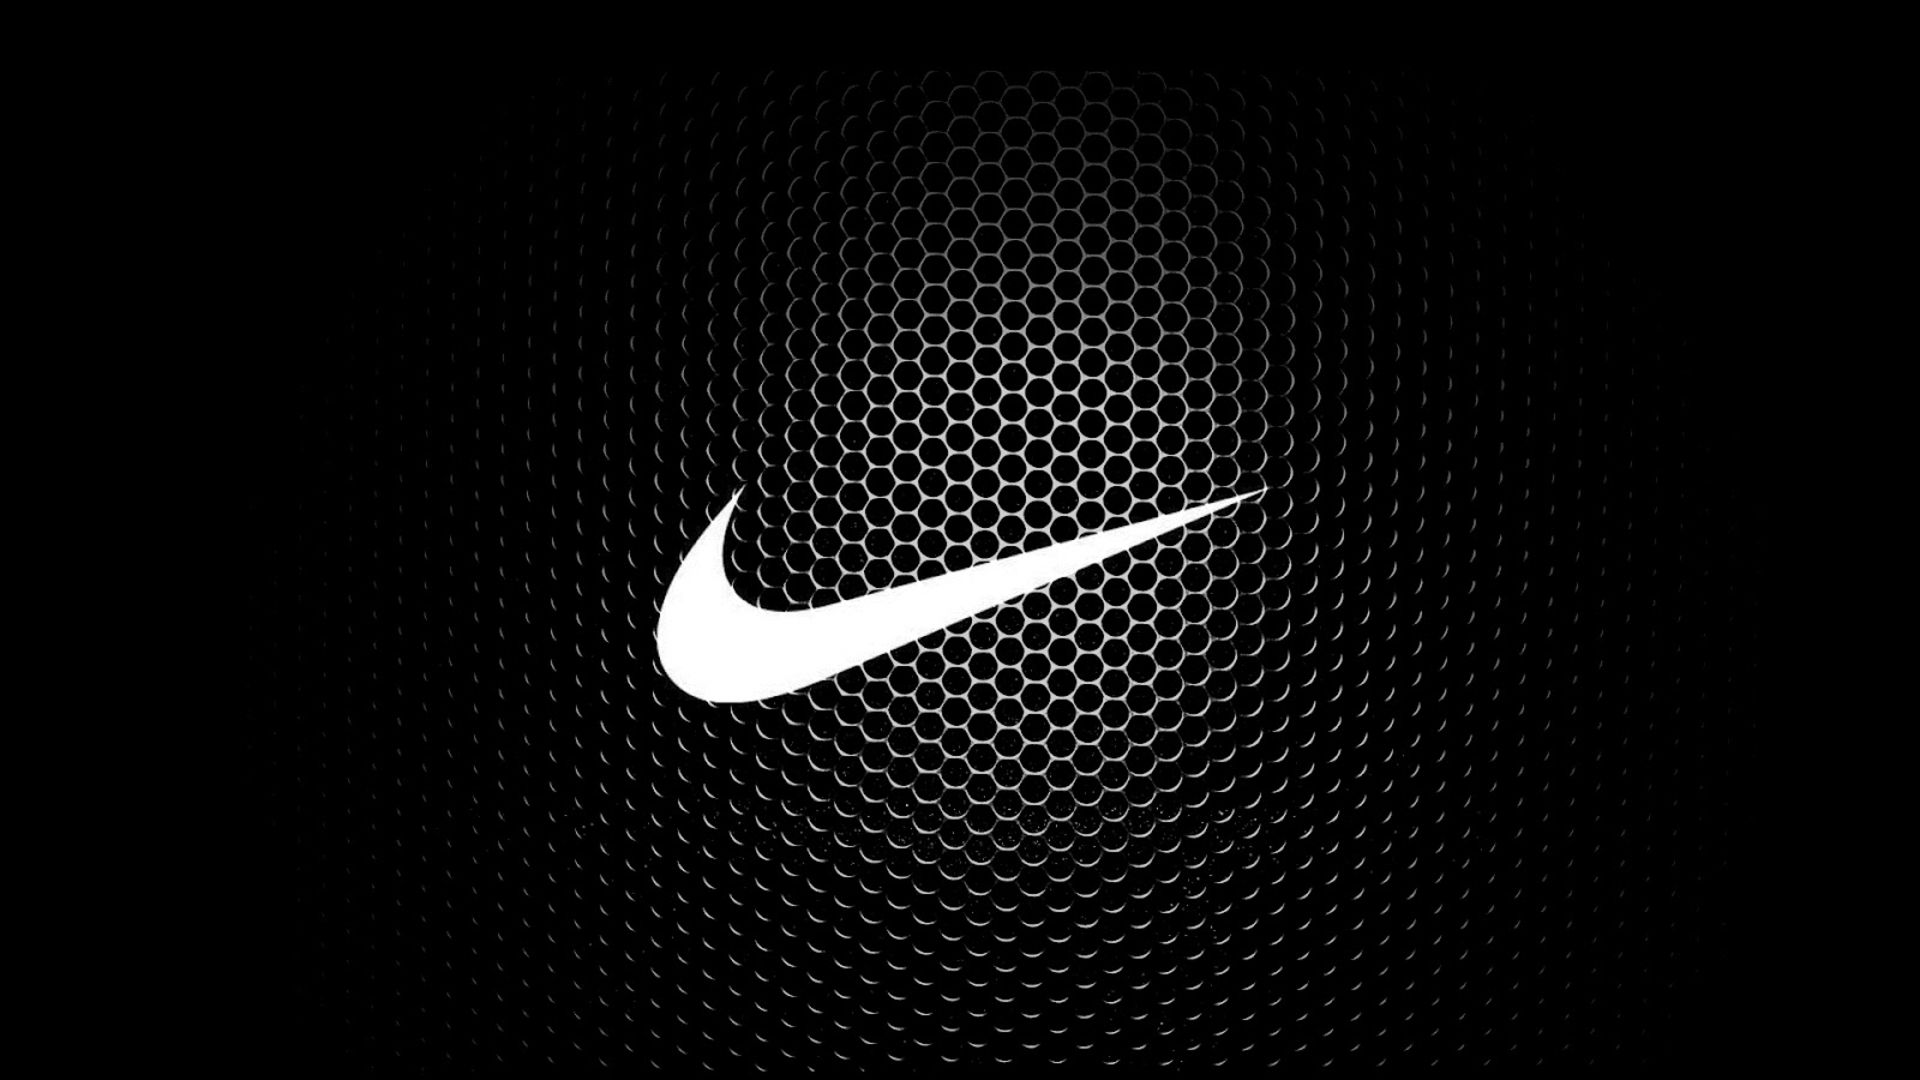 Nike Wallpaper HD Background Image FHD